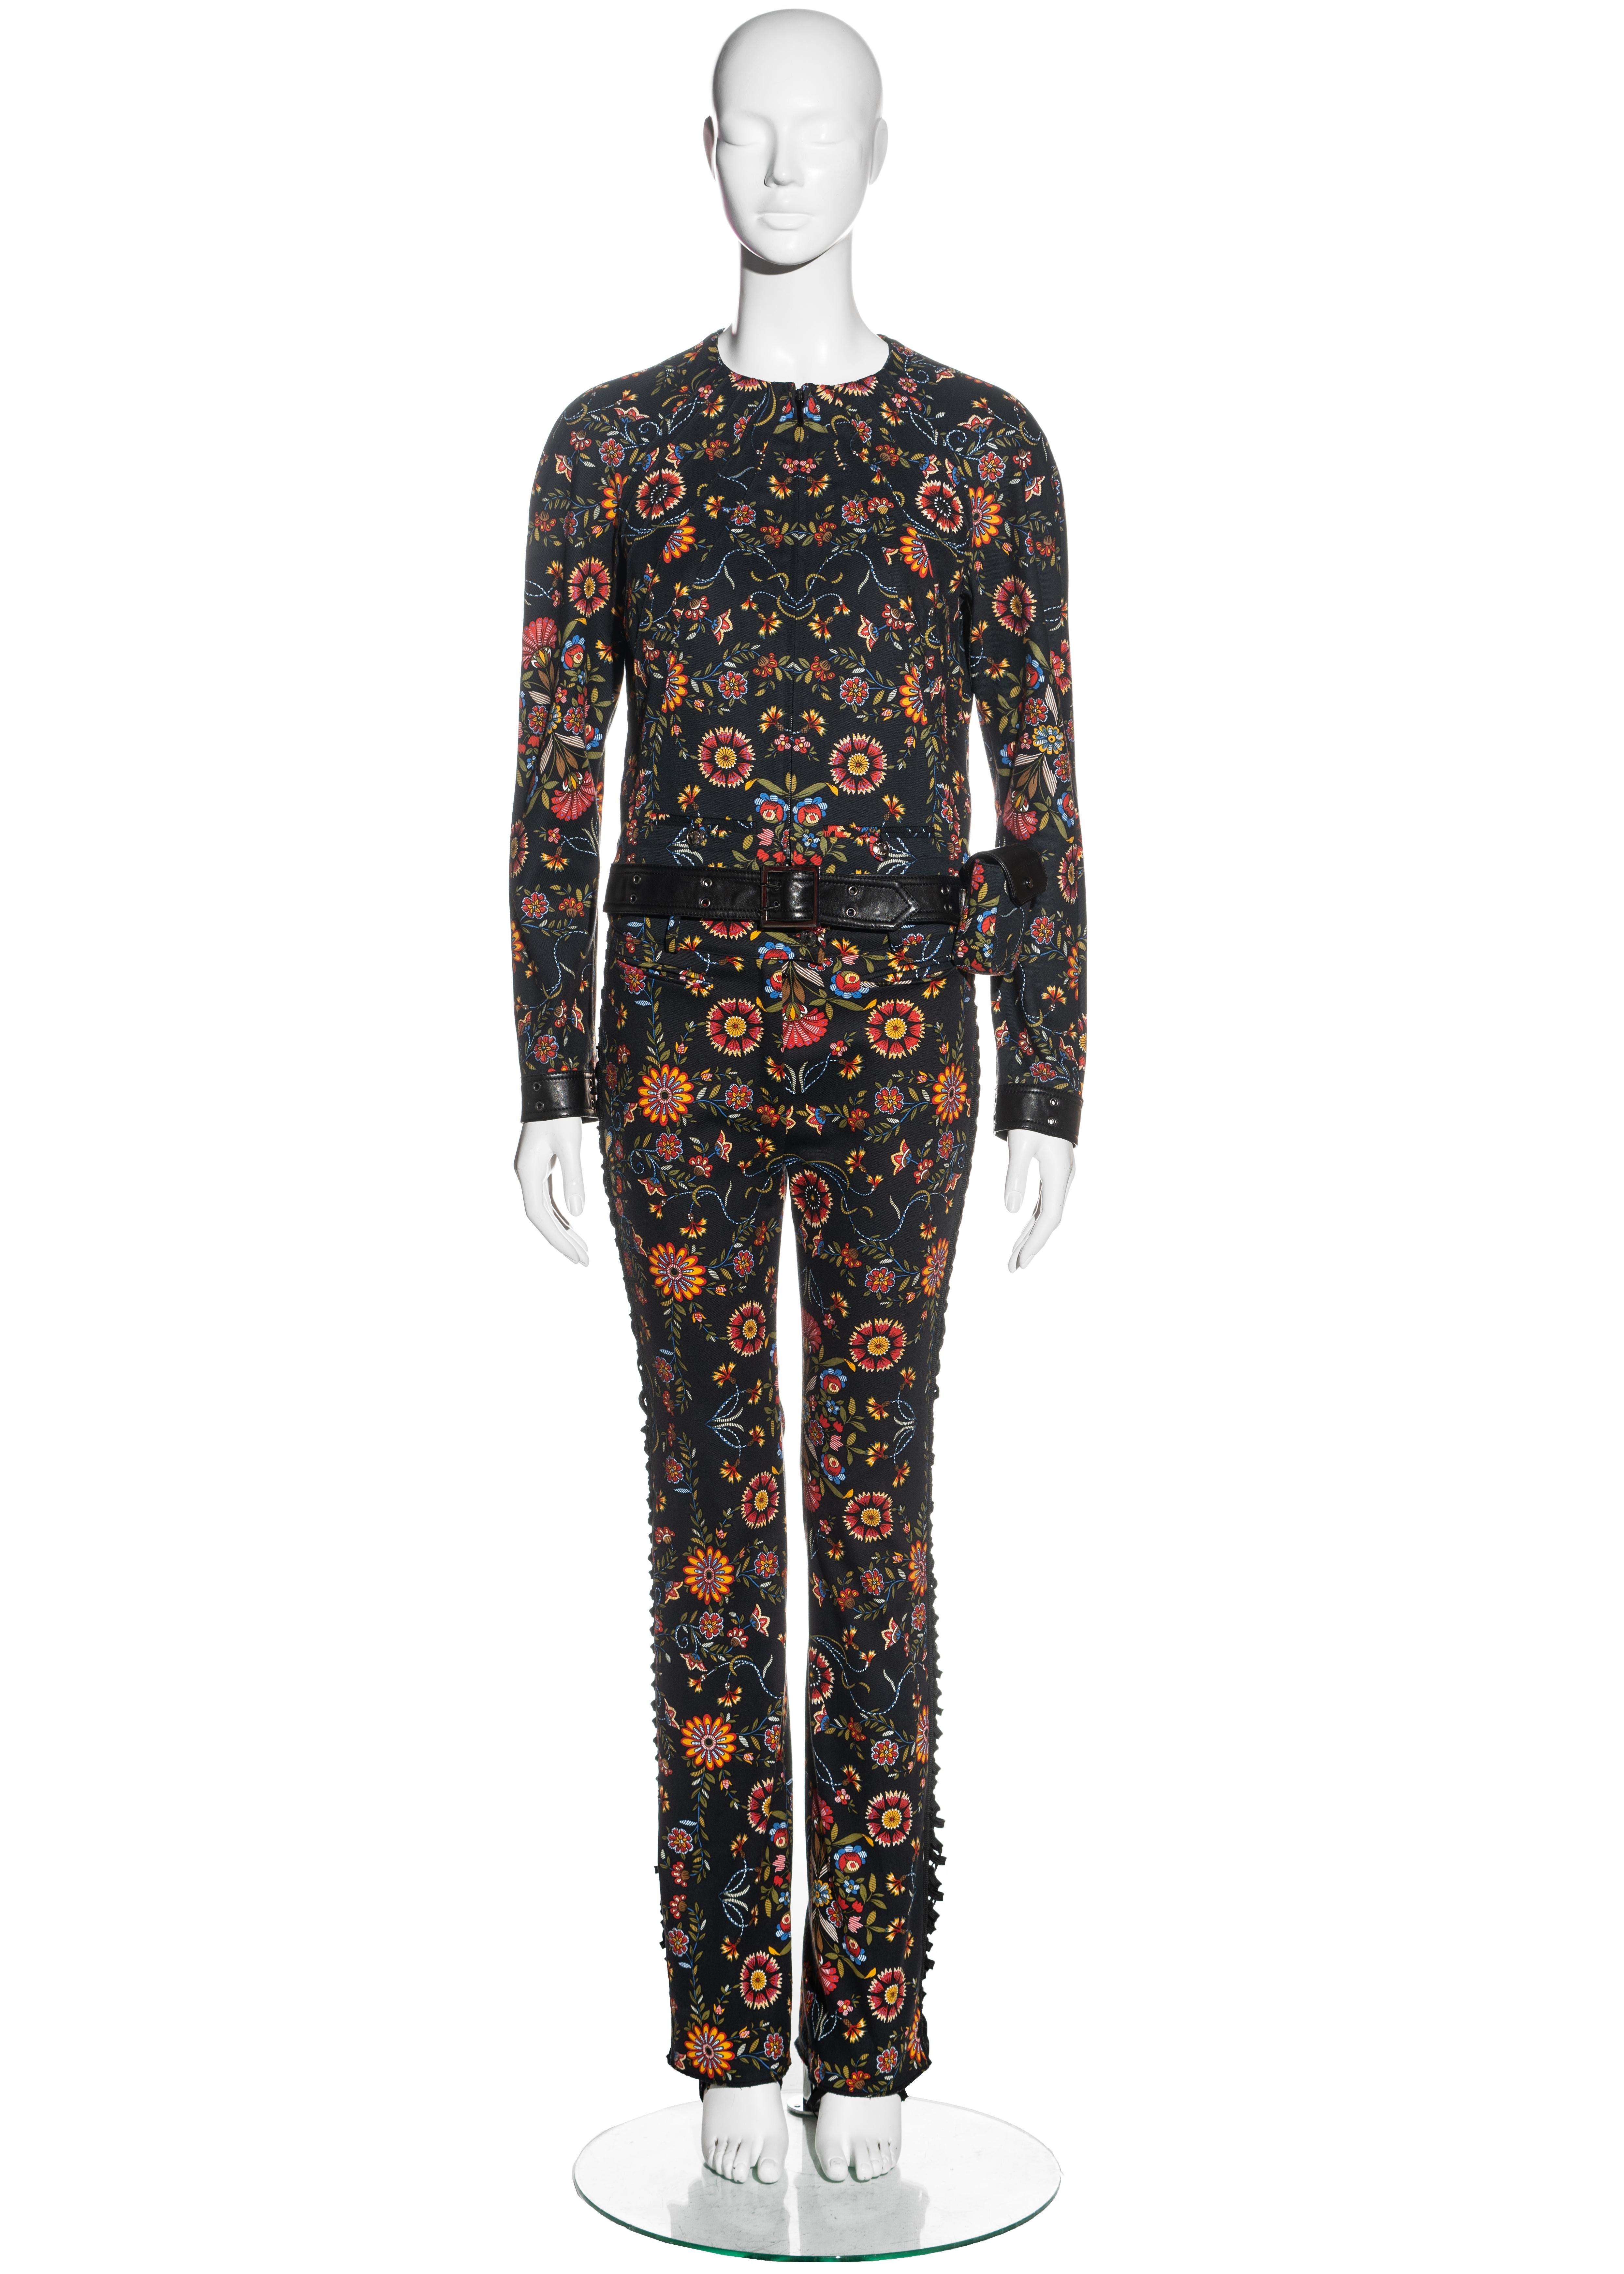 ▪ Christian Dior floral cotton and leather pant suit
▪ Designed by John Galliano
▪ 98% Cotton 2% Elastane / 100% Leather 
▪ Round neck zip-up jacket 
▪ Attached leather belt with metal buckle and grommets 
▪ Detachable bag on the hip 
▪ Flared pants